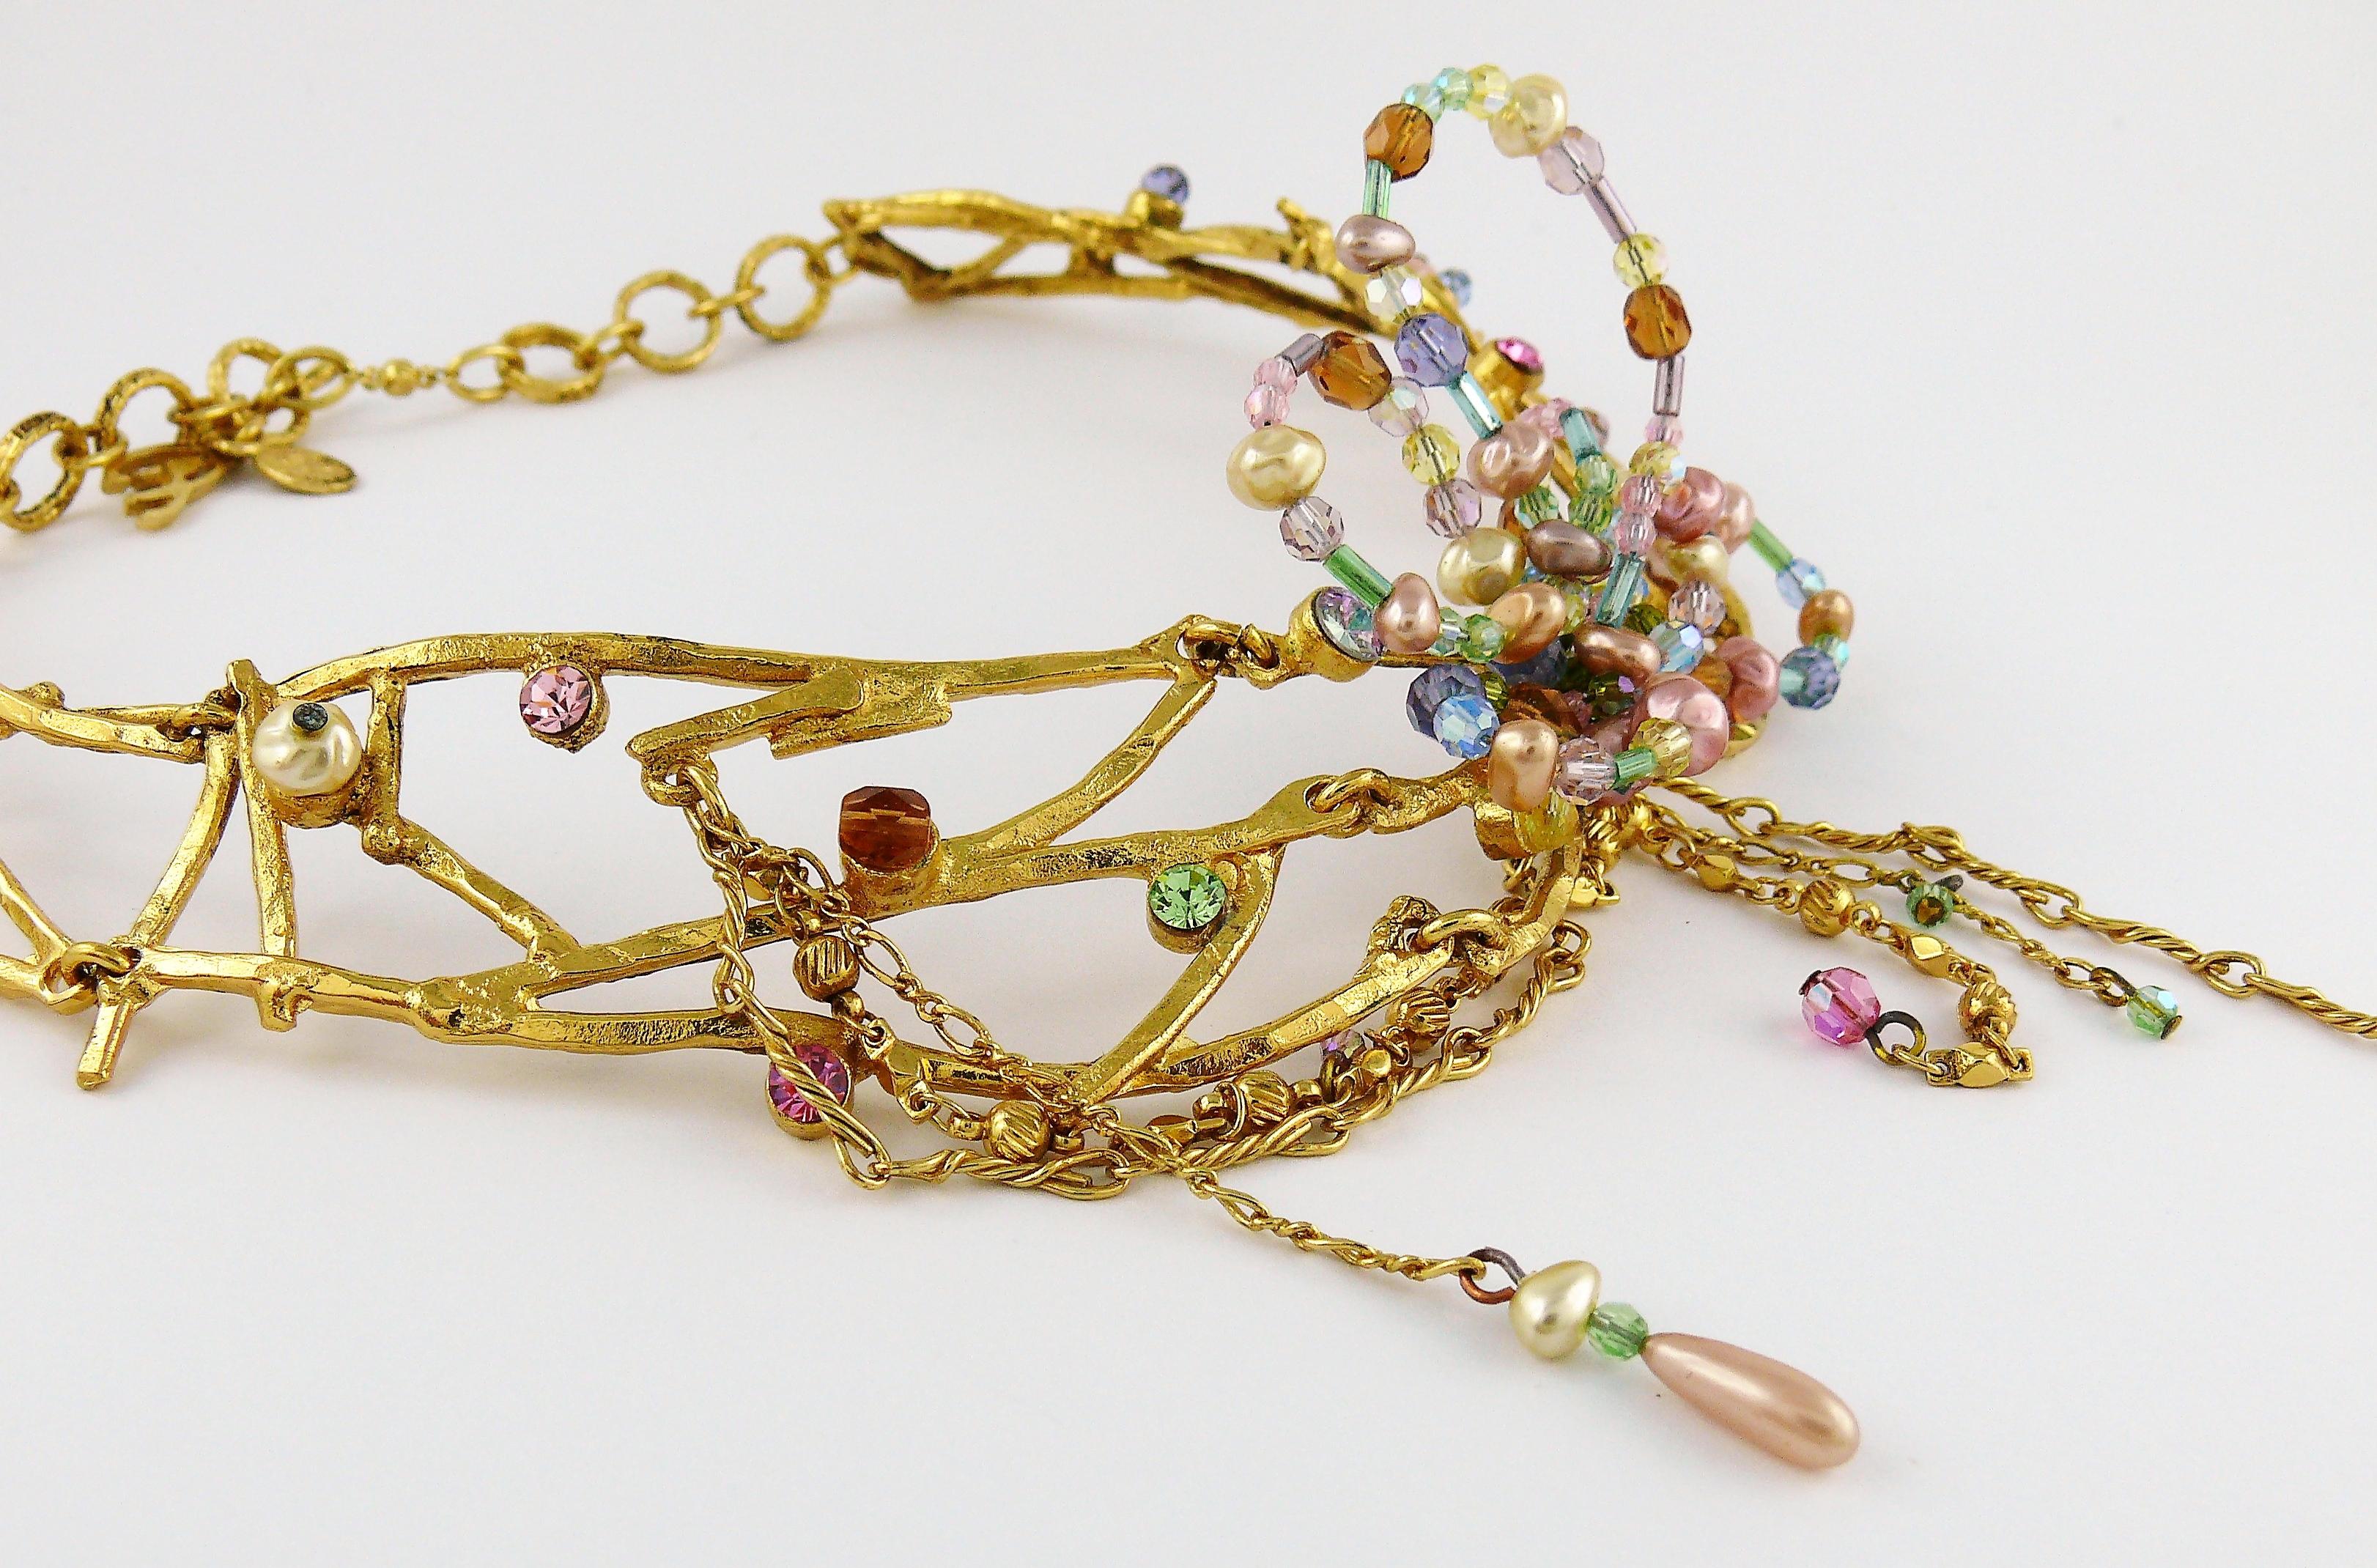 jewelled necklace